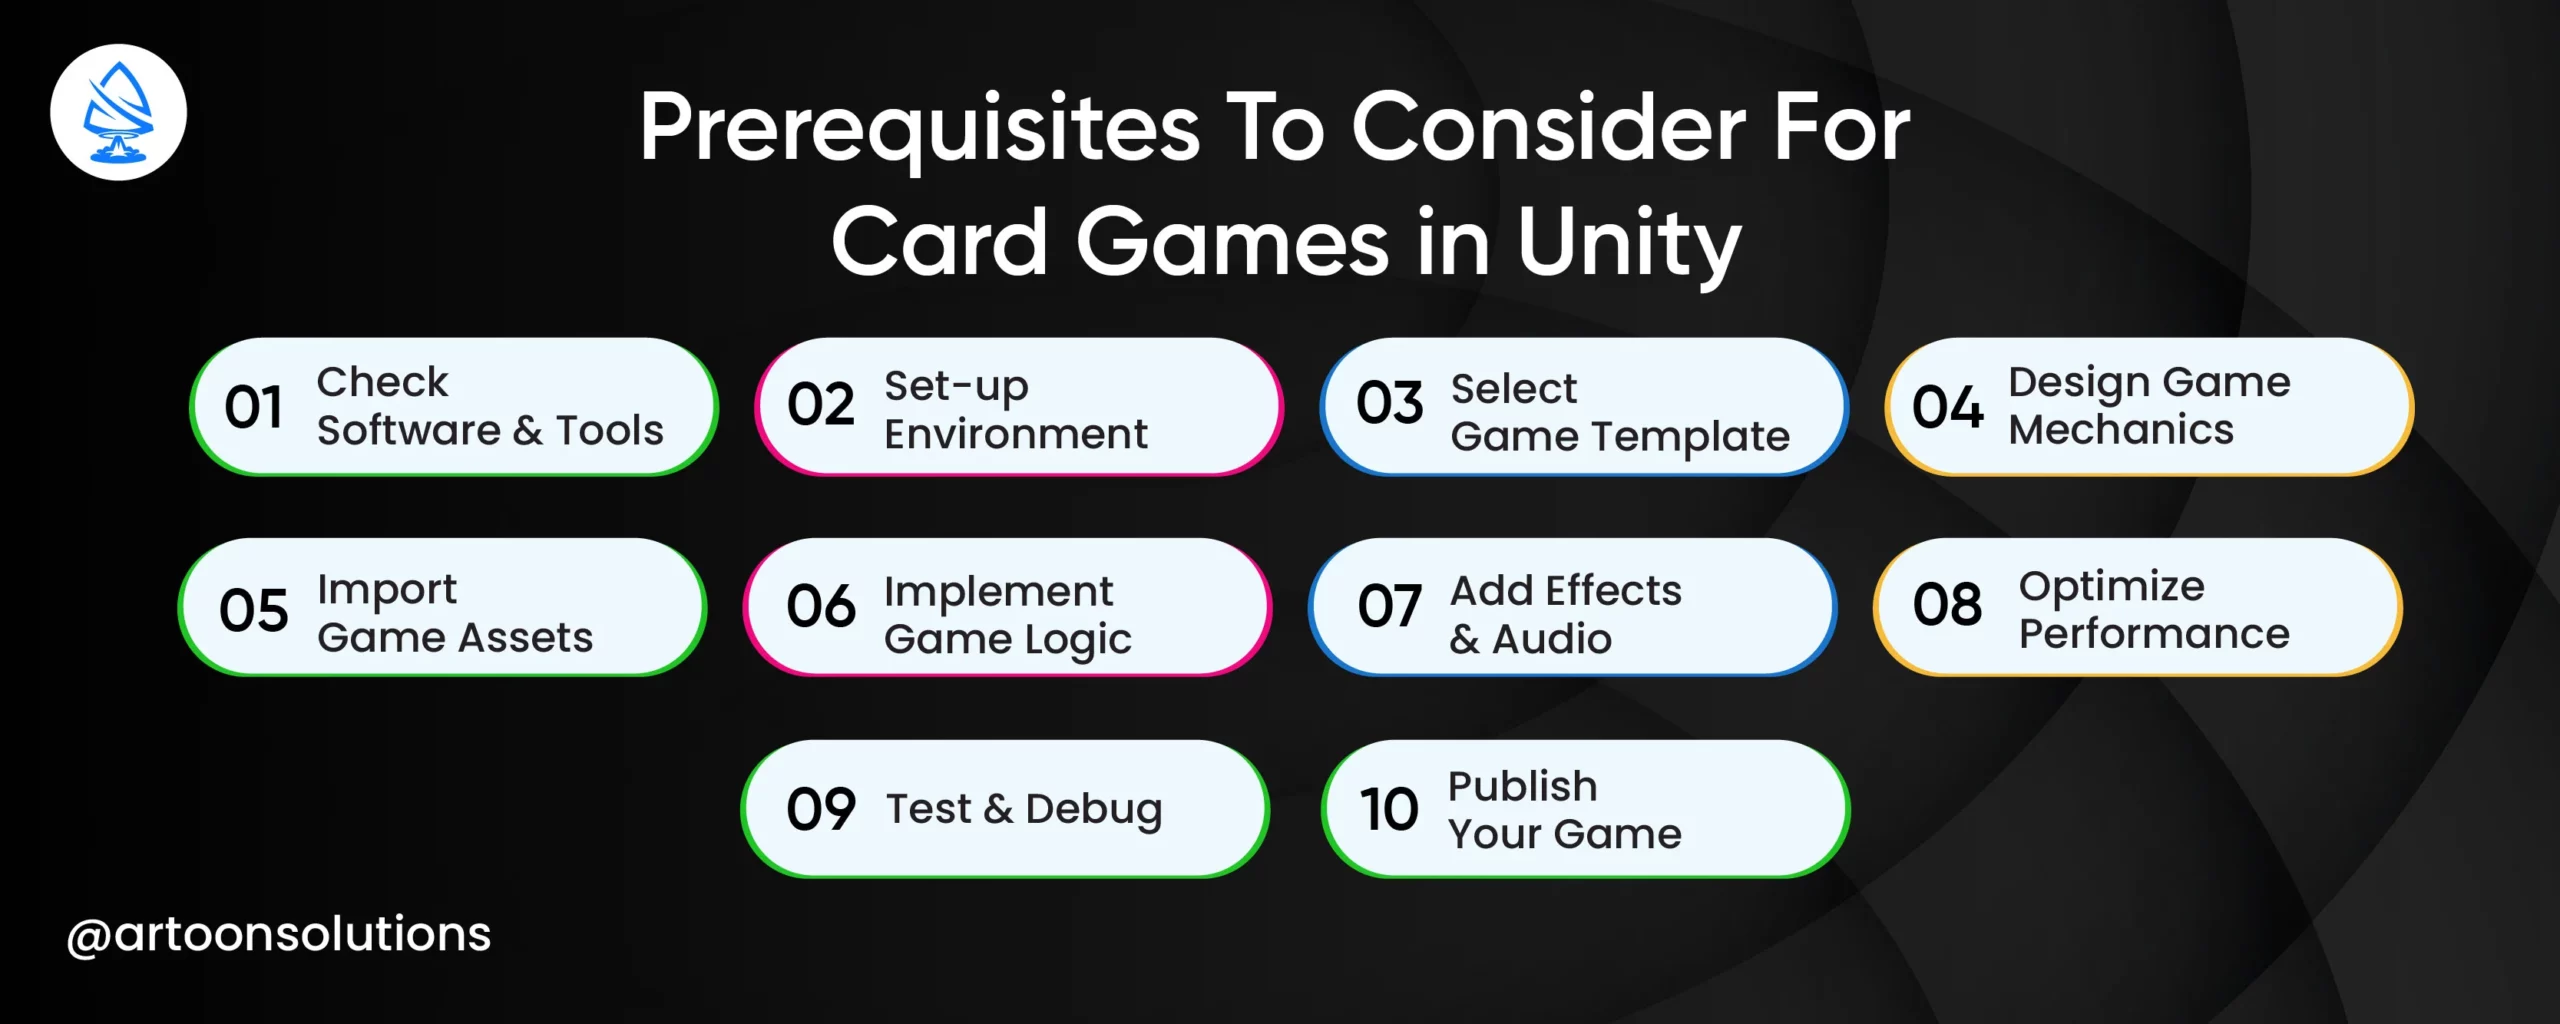 Prerequisites To Consider card games in unity